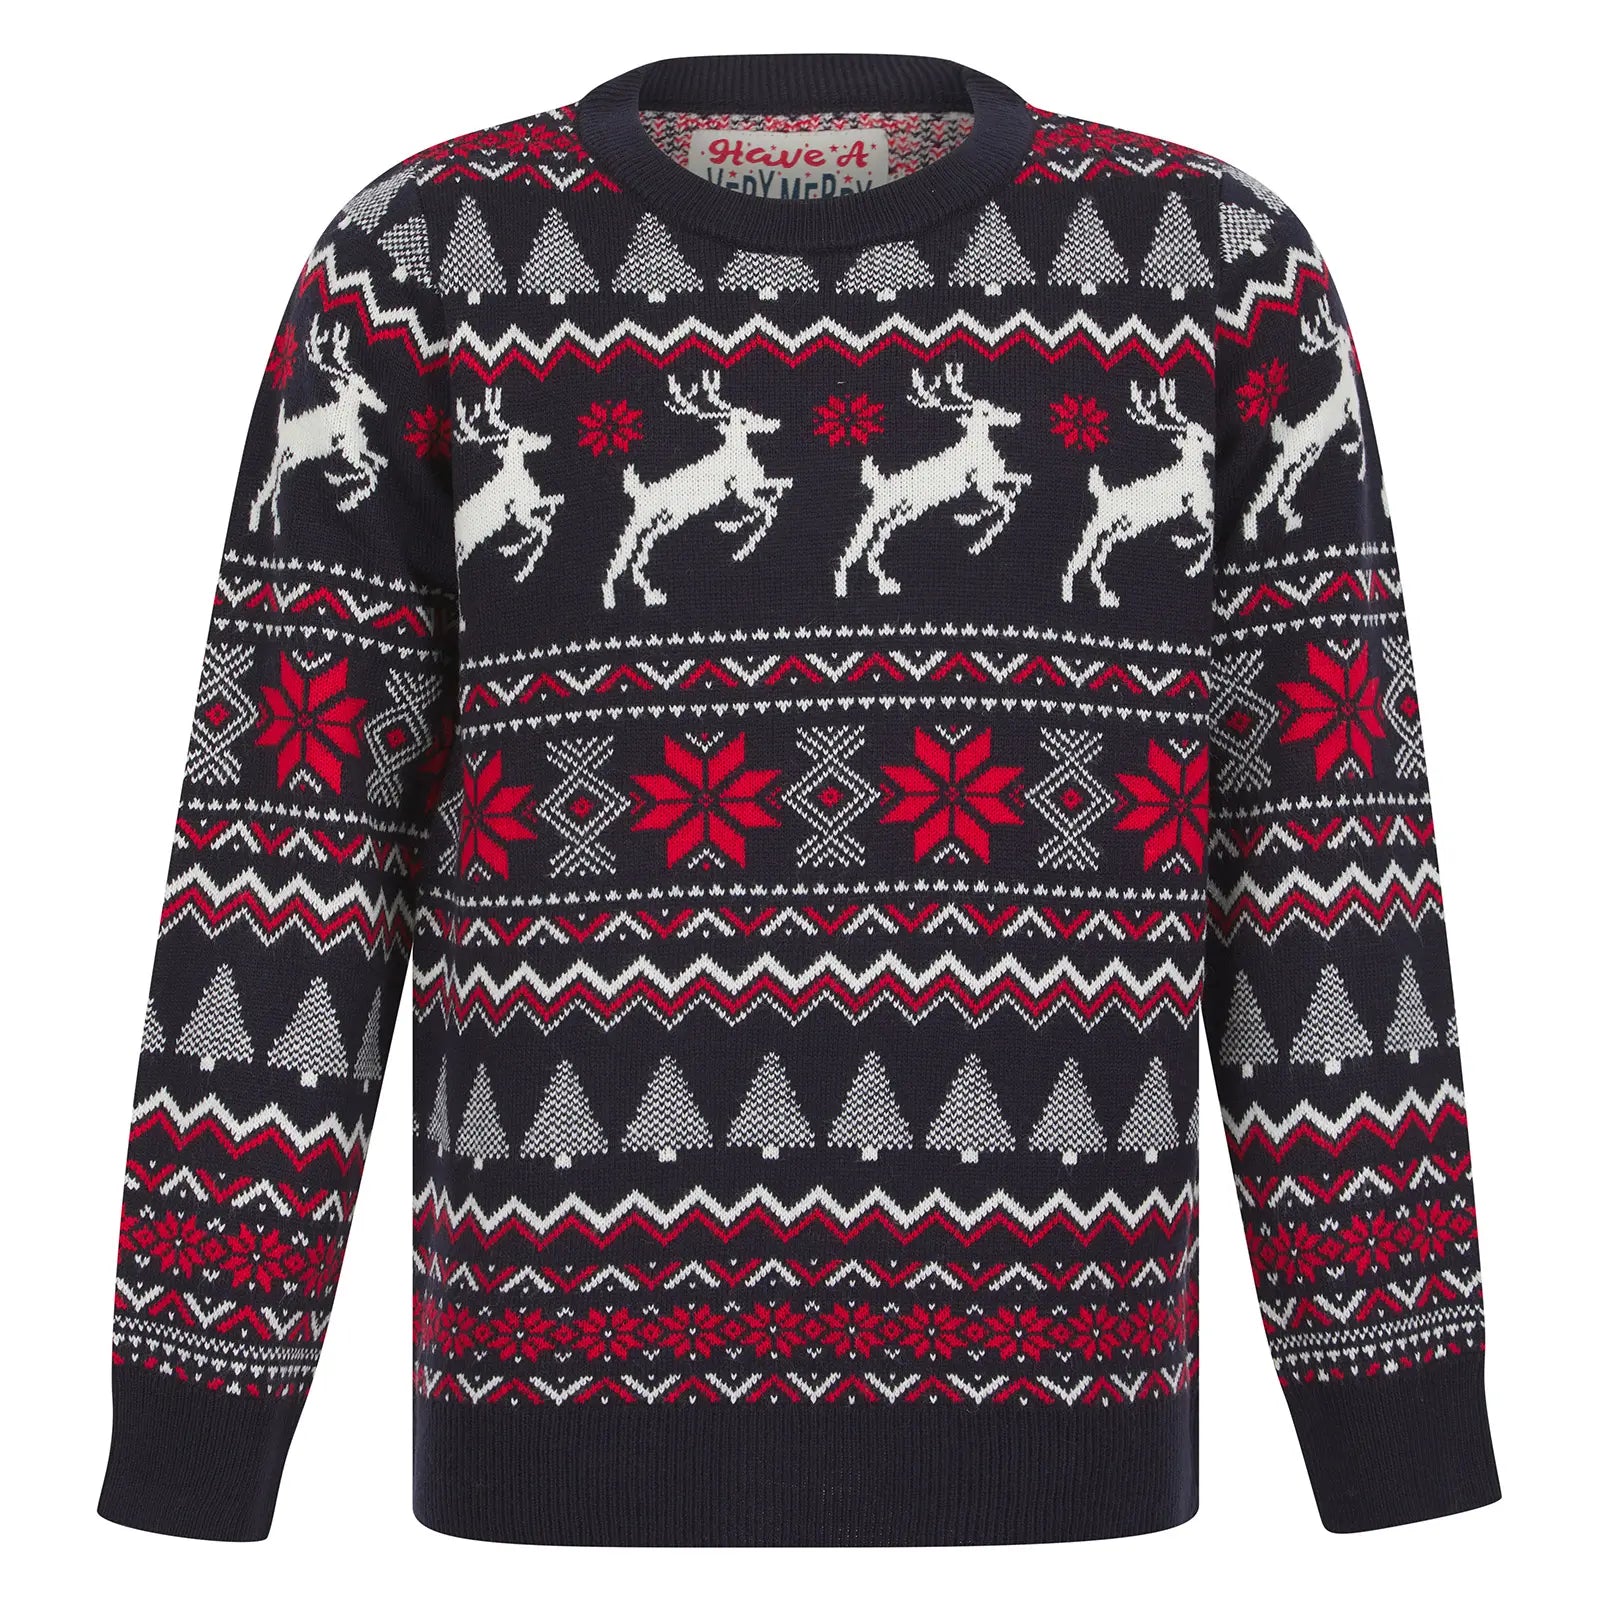 black christmas jumper featuring festive fair isle pattern with dancing reindeers, snowflakes, christmas trees and zig zag patterns, with a crew neckline and ribbed arm cuffs